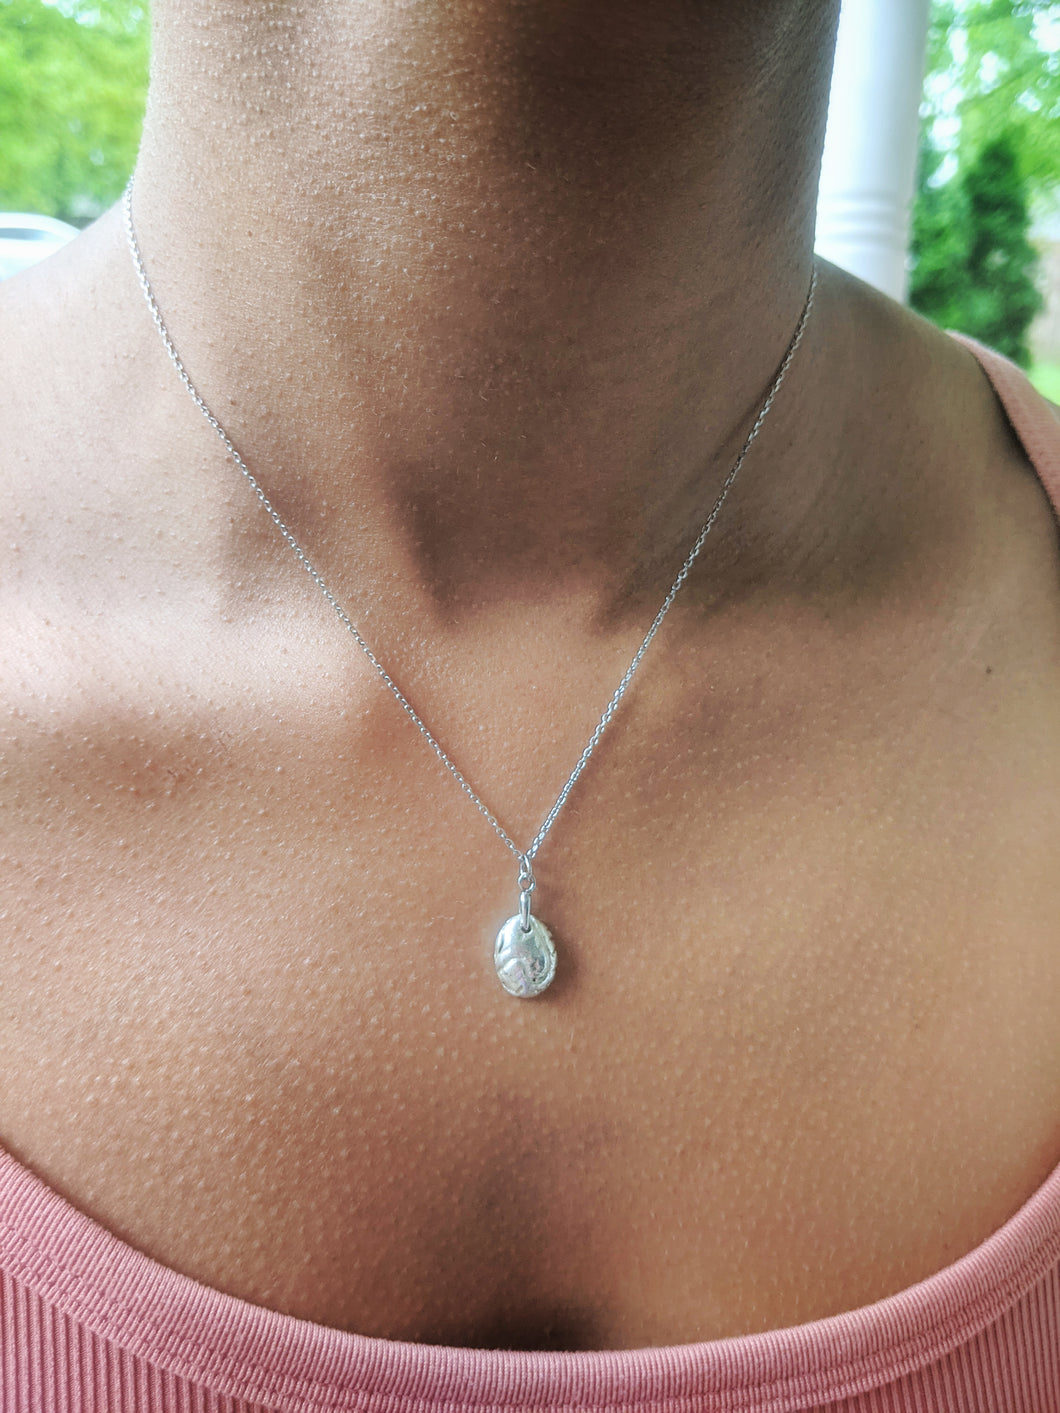 Oceans Heart Solid Silver Pendant Necklace.